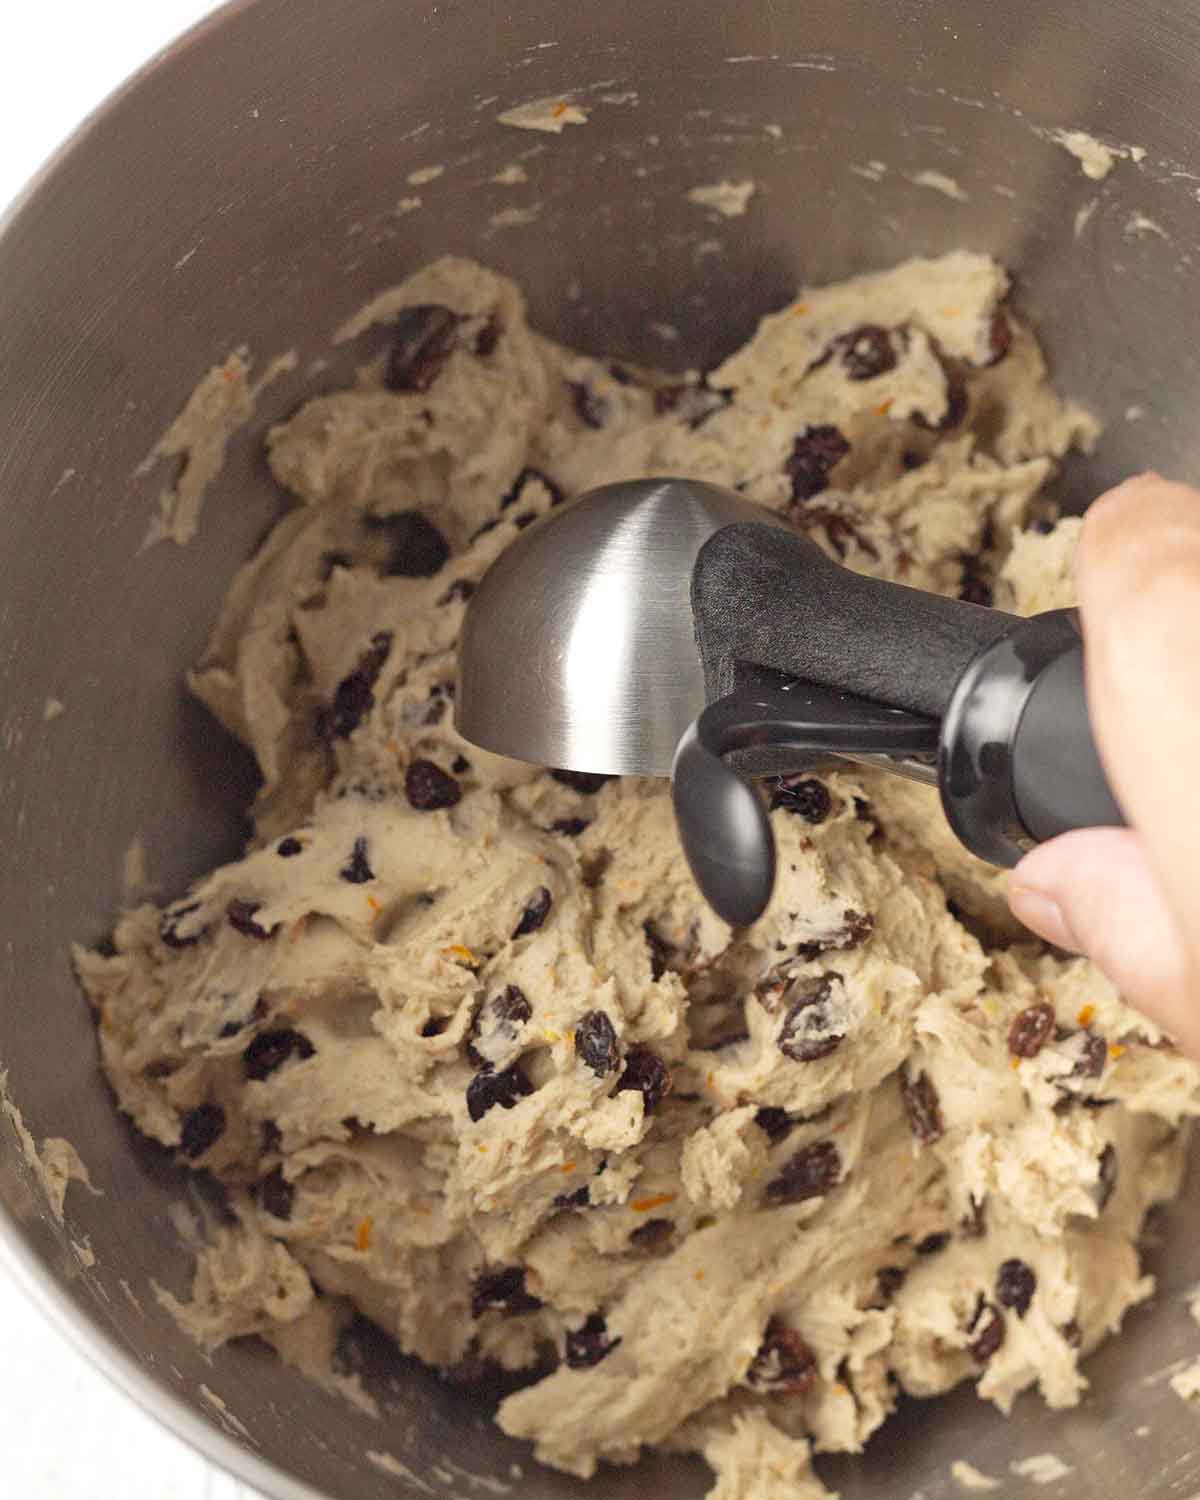 A hand scooping gluten-free bun dough with an ice cream scoop from a mixing bowl to form into rolls.